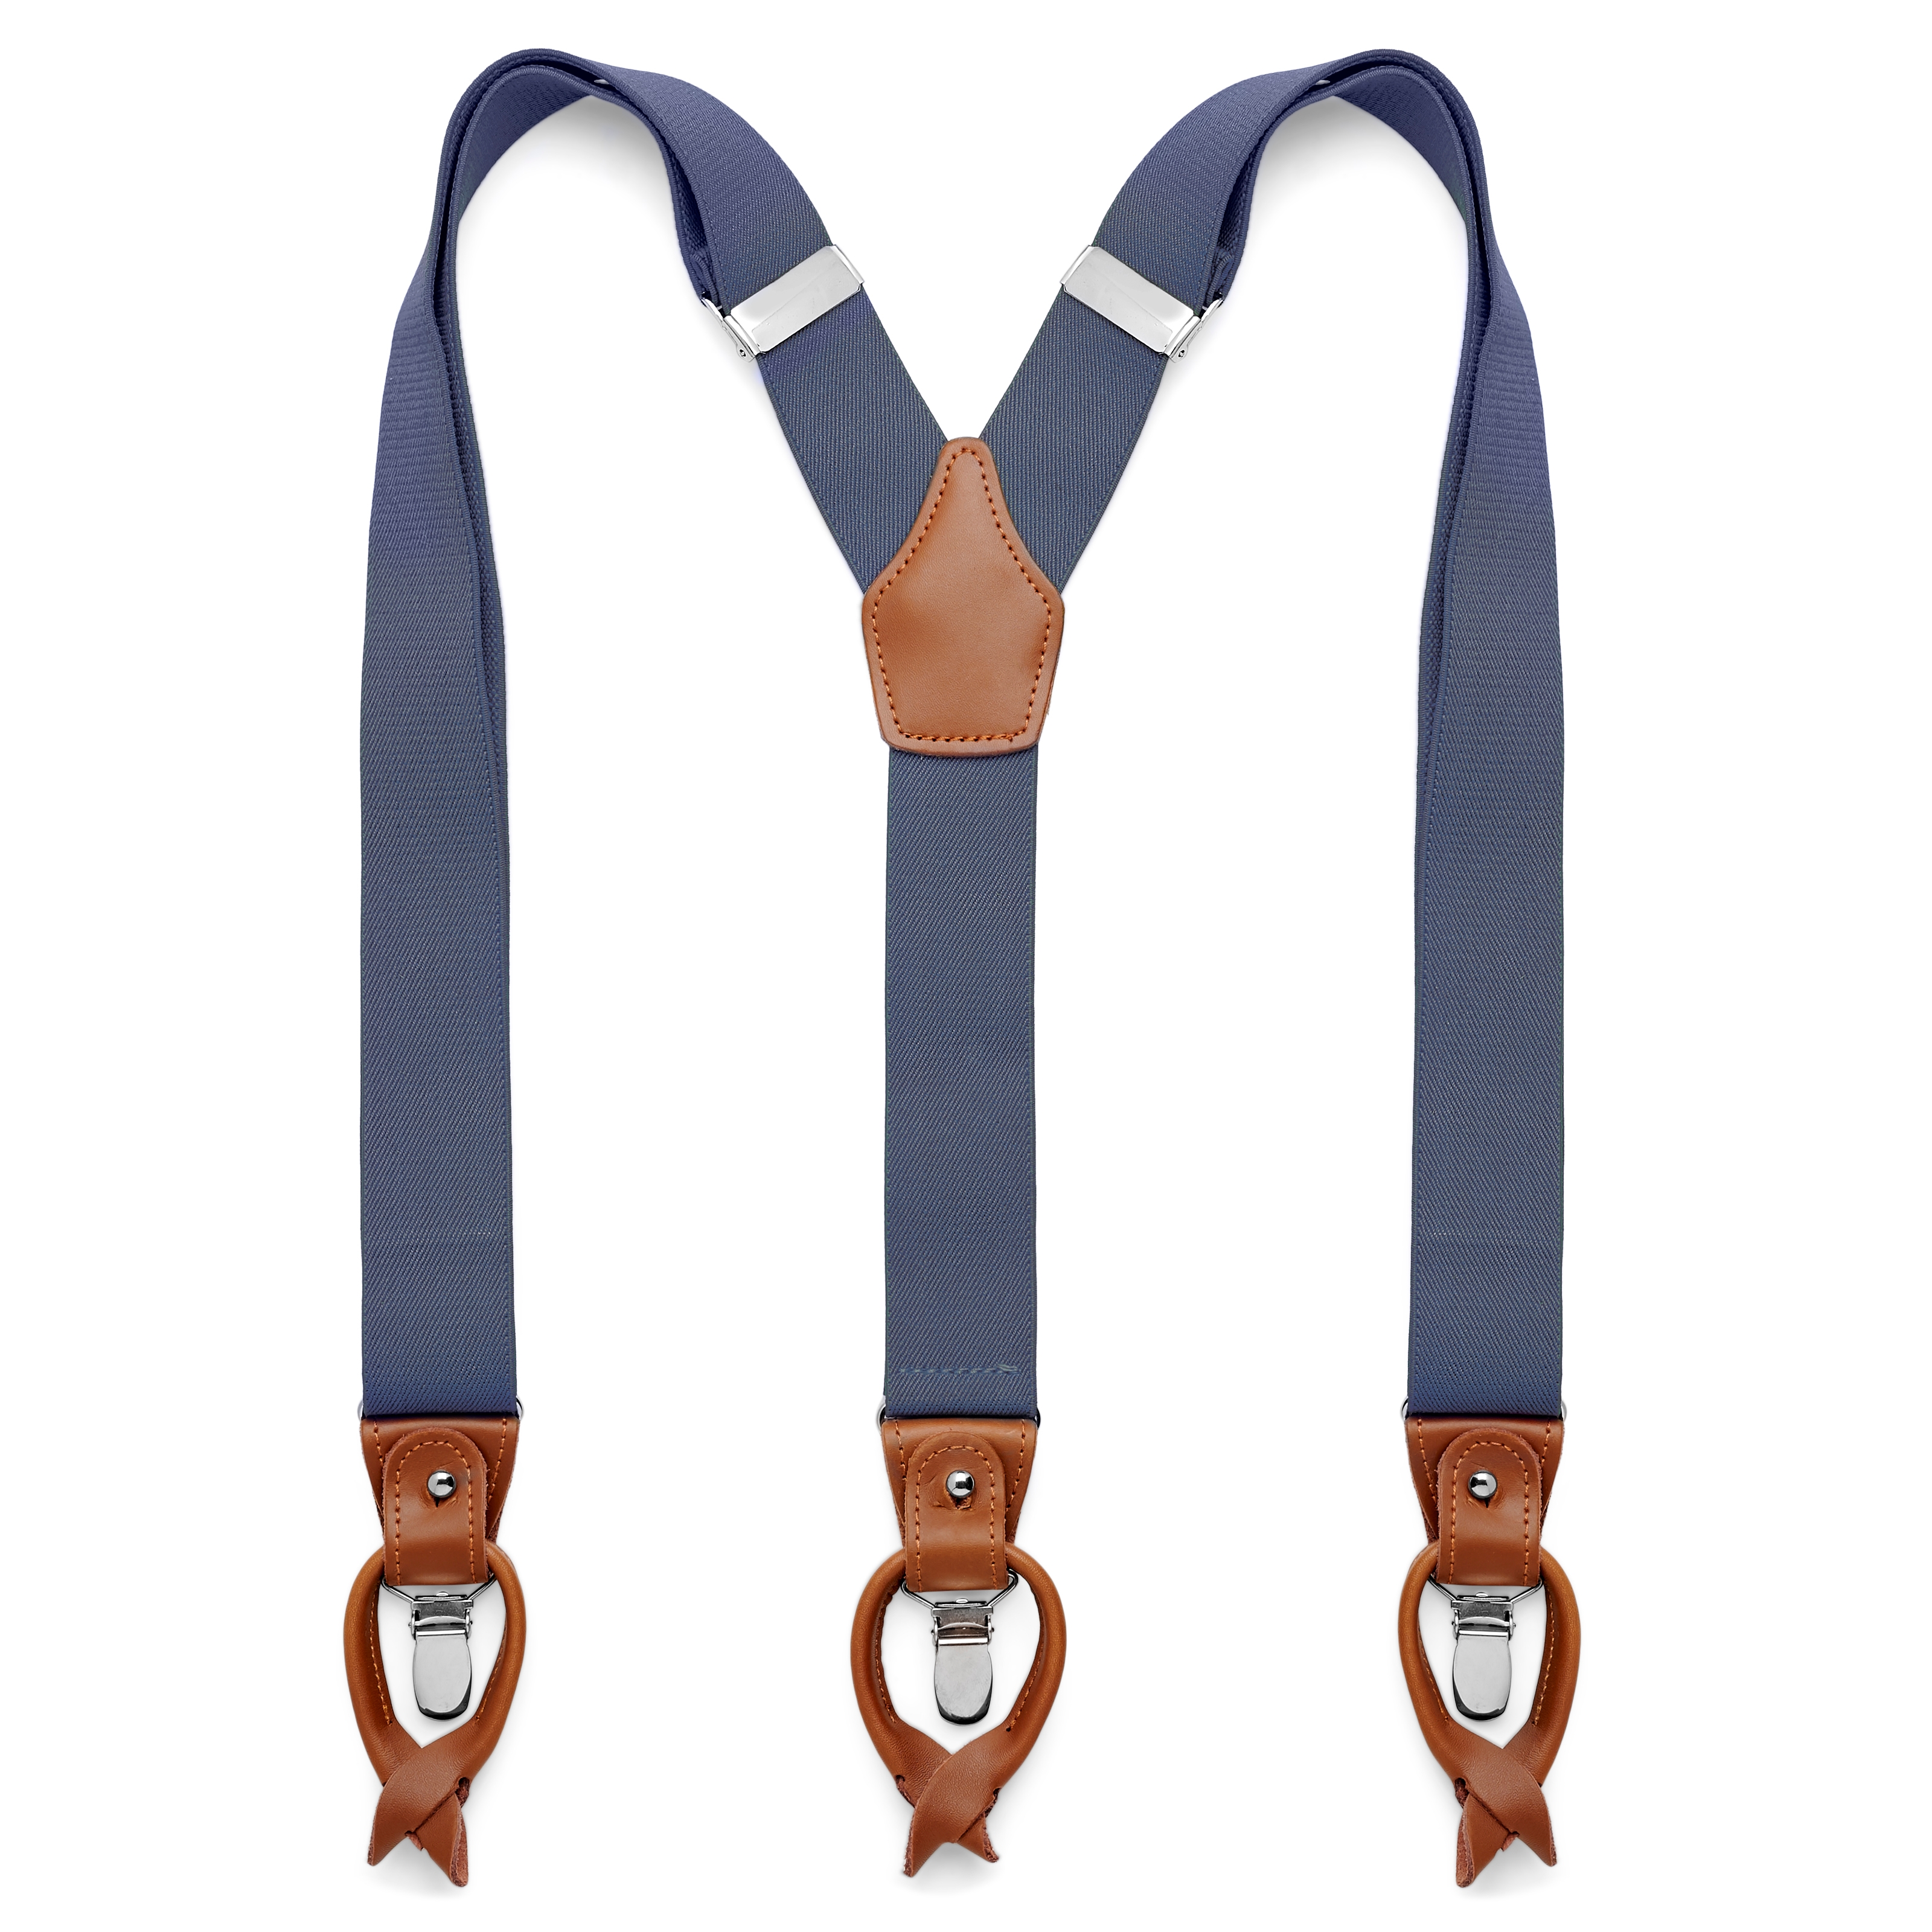 Adjustable Heavy Duty Burnt Orange Suspenders For Men 35cm Wide Y Back With  6 Metal Clips Perfect Father Or Husband Gift From Sohucom, $15.15 |  DHgate.Com